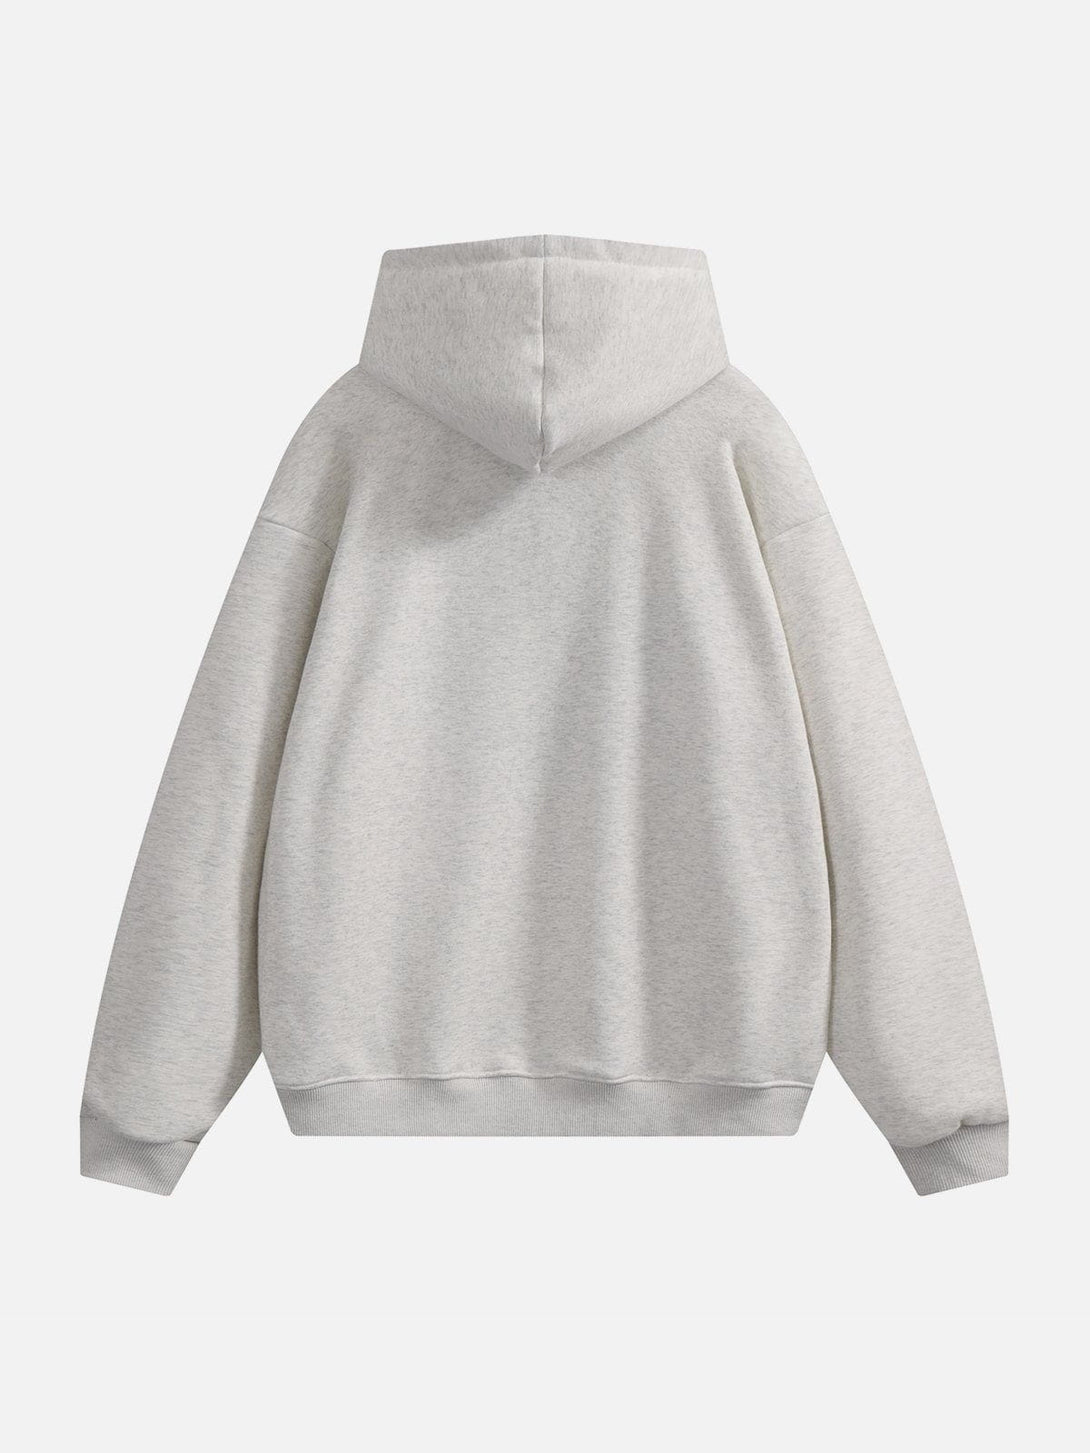 Levefly - Stellaris Embroidered Hoodie - Streetwear Fashion - levefly.com